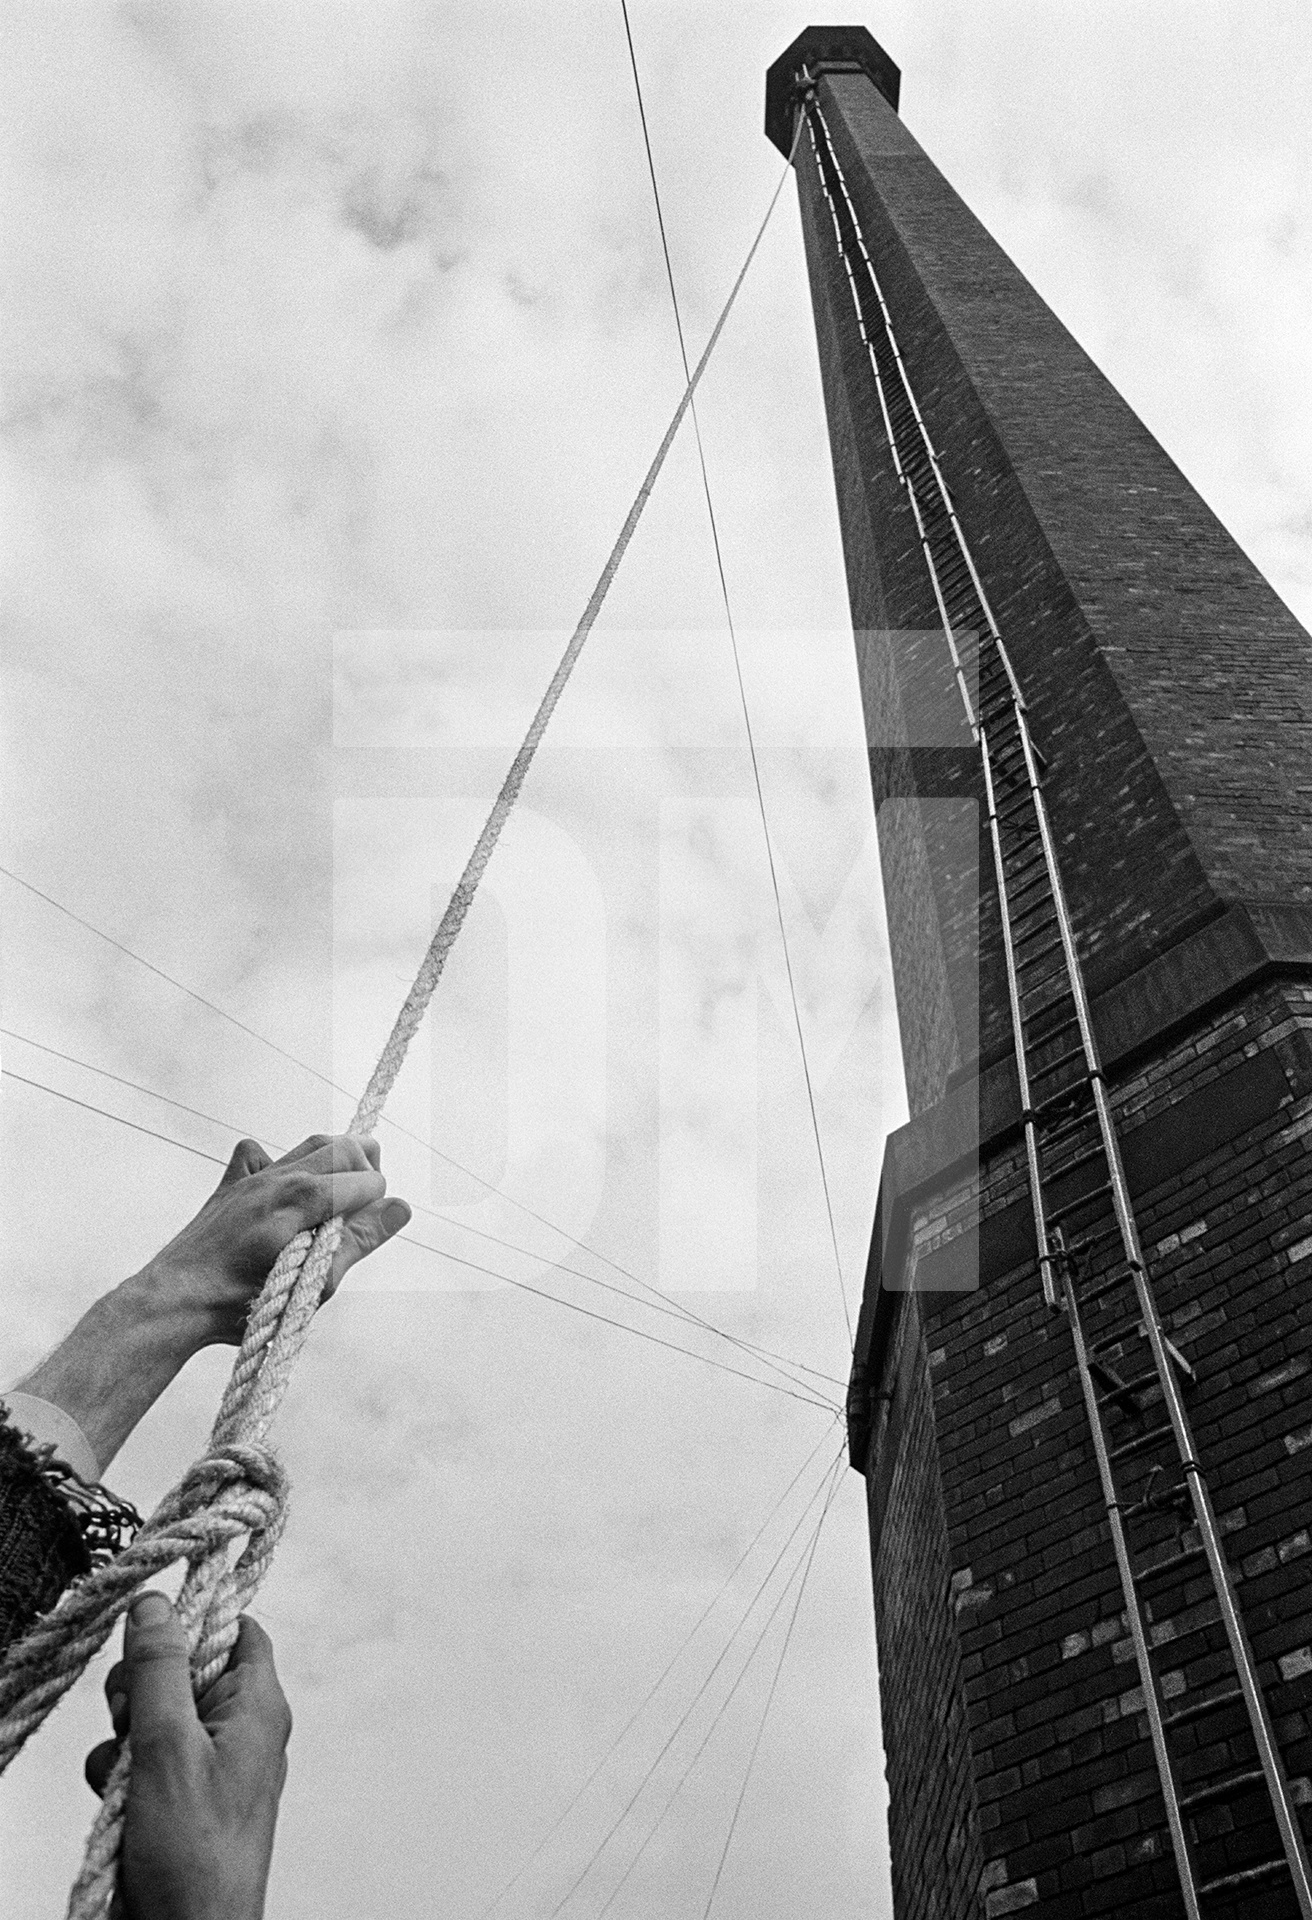 Laddering almost complete, as seen from the point-of-view of the steeplejack’s assistant. September 1976 by Daniel Meadows